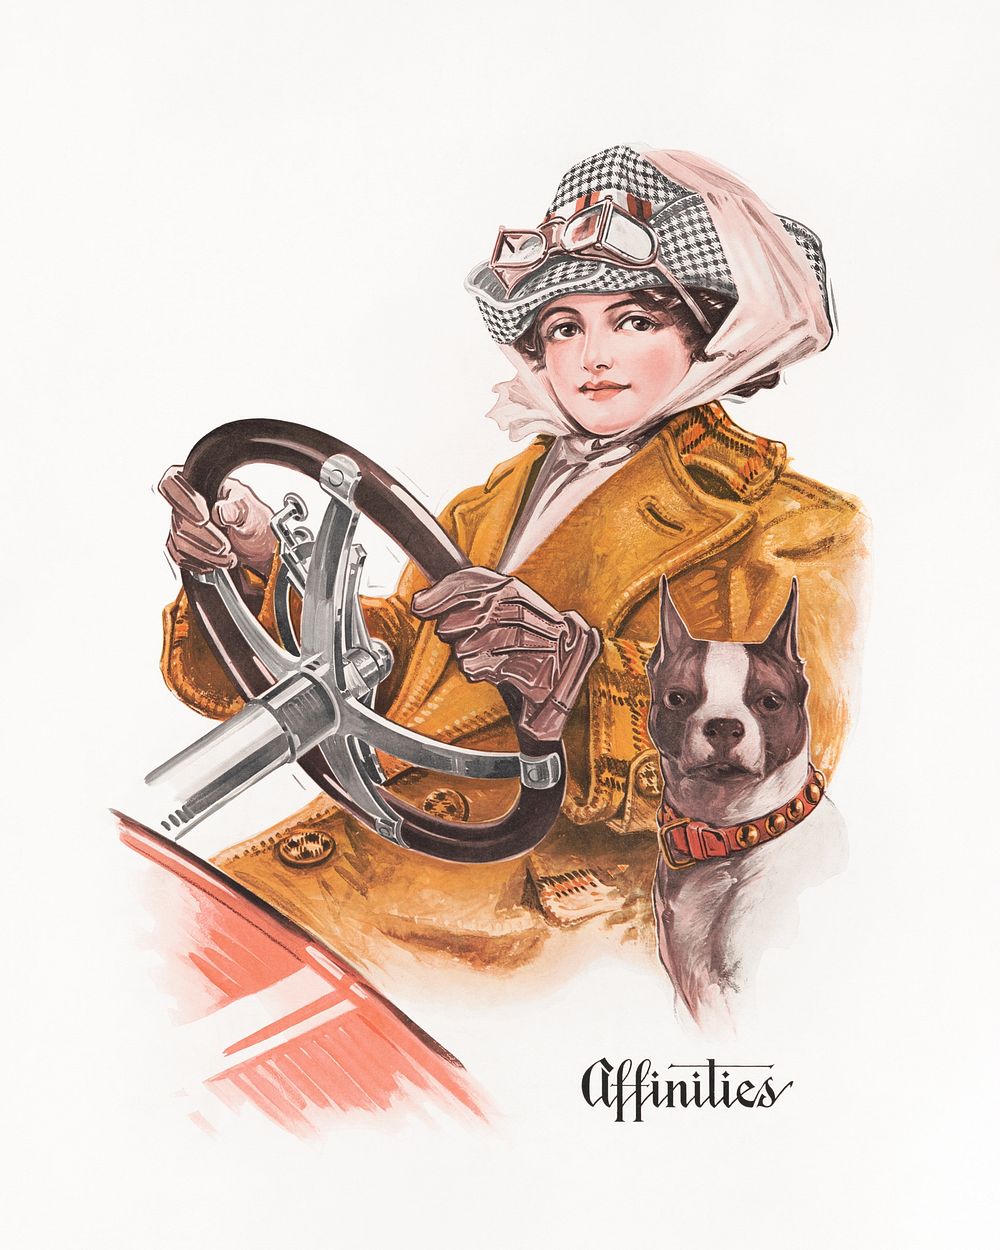 Affinities (1911) vintage woman riding an automobile. Original public domain image from the Library of Congress. Digitally…